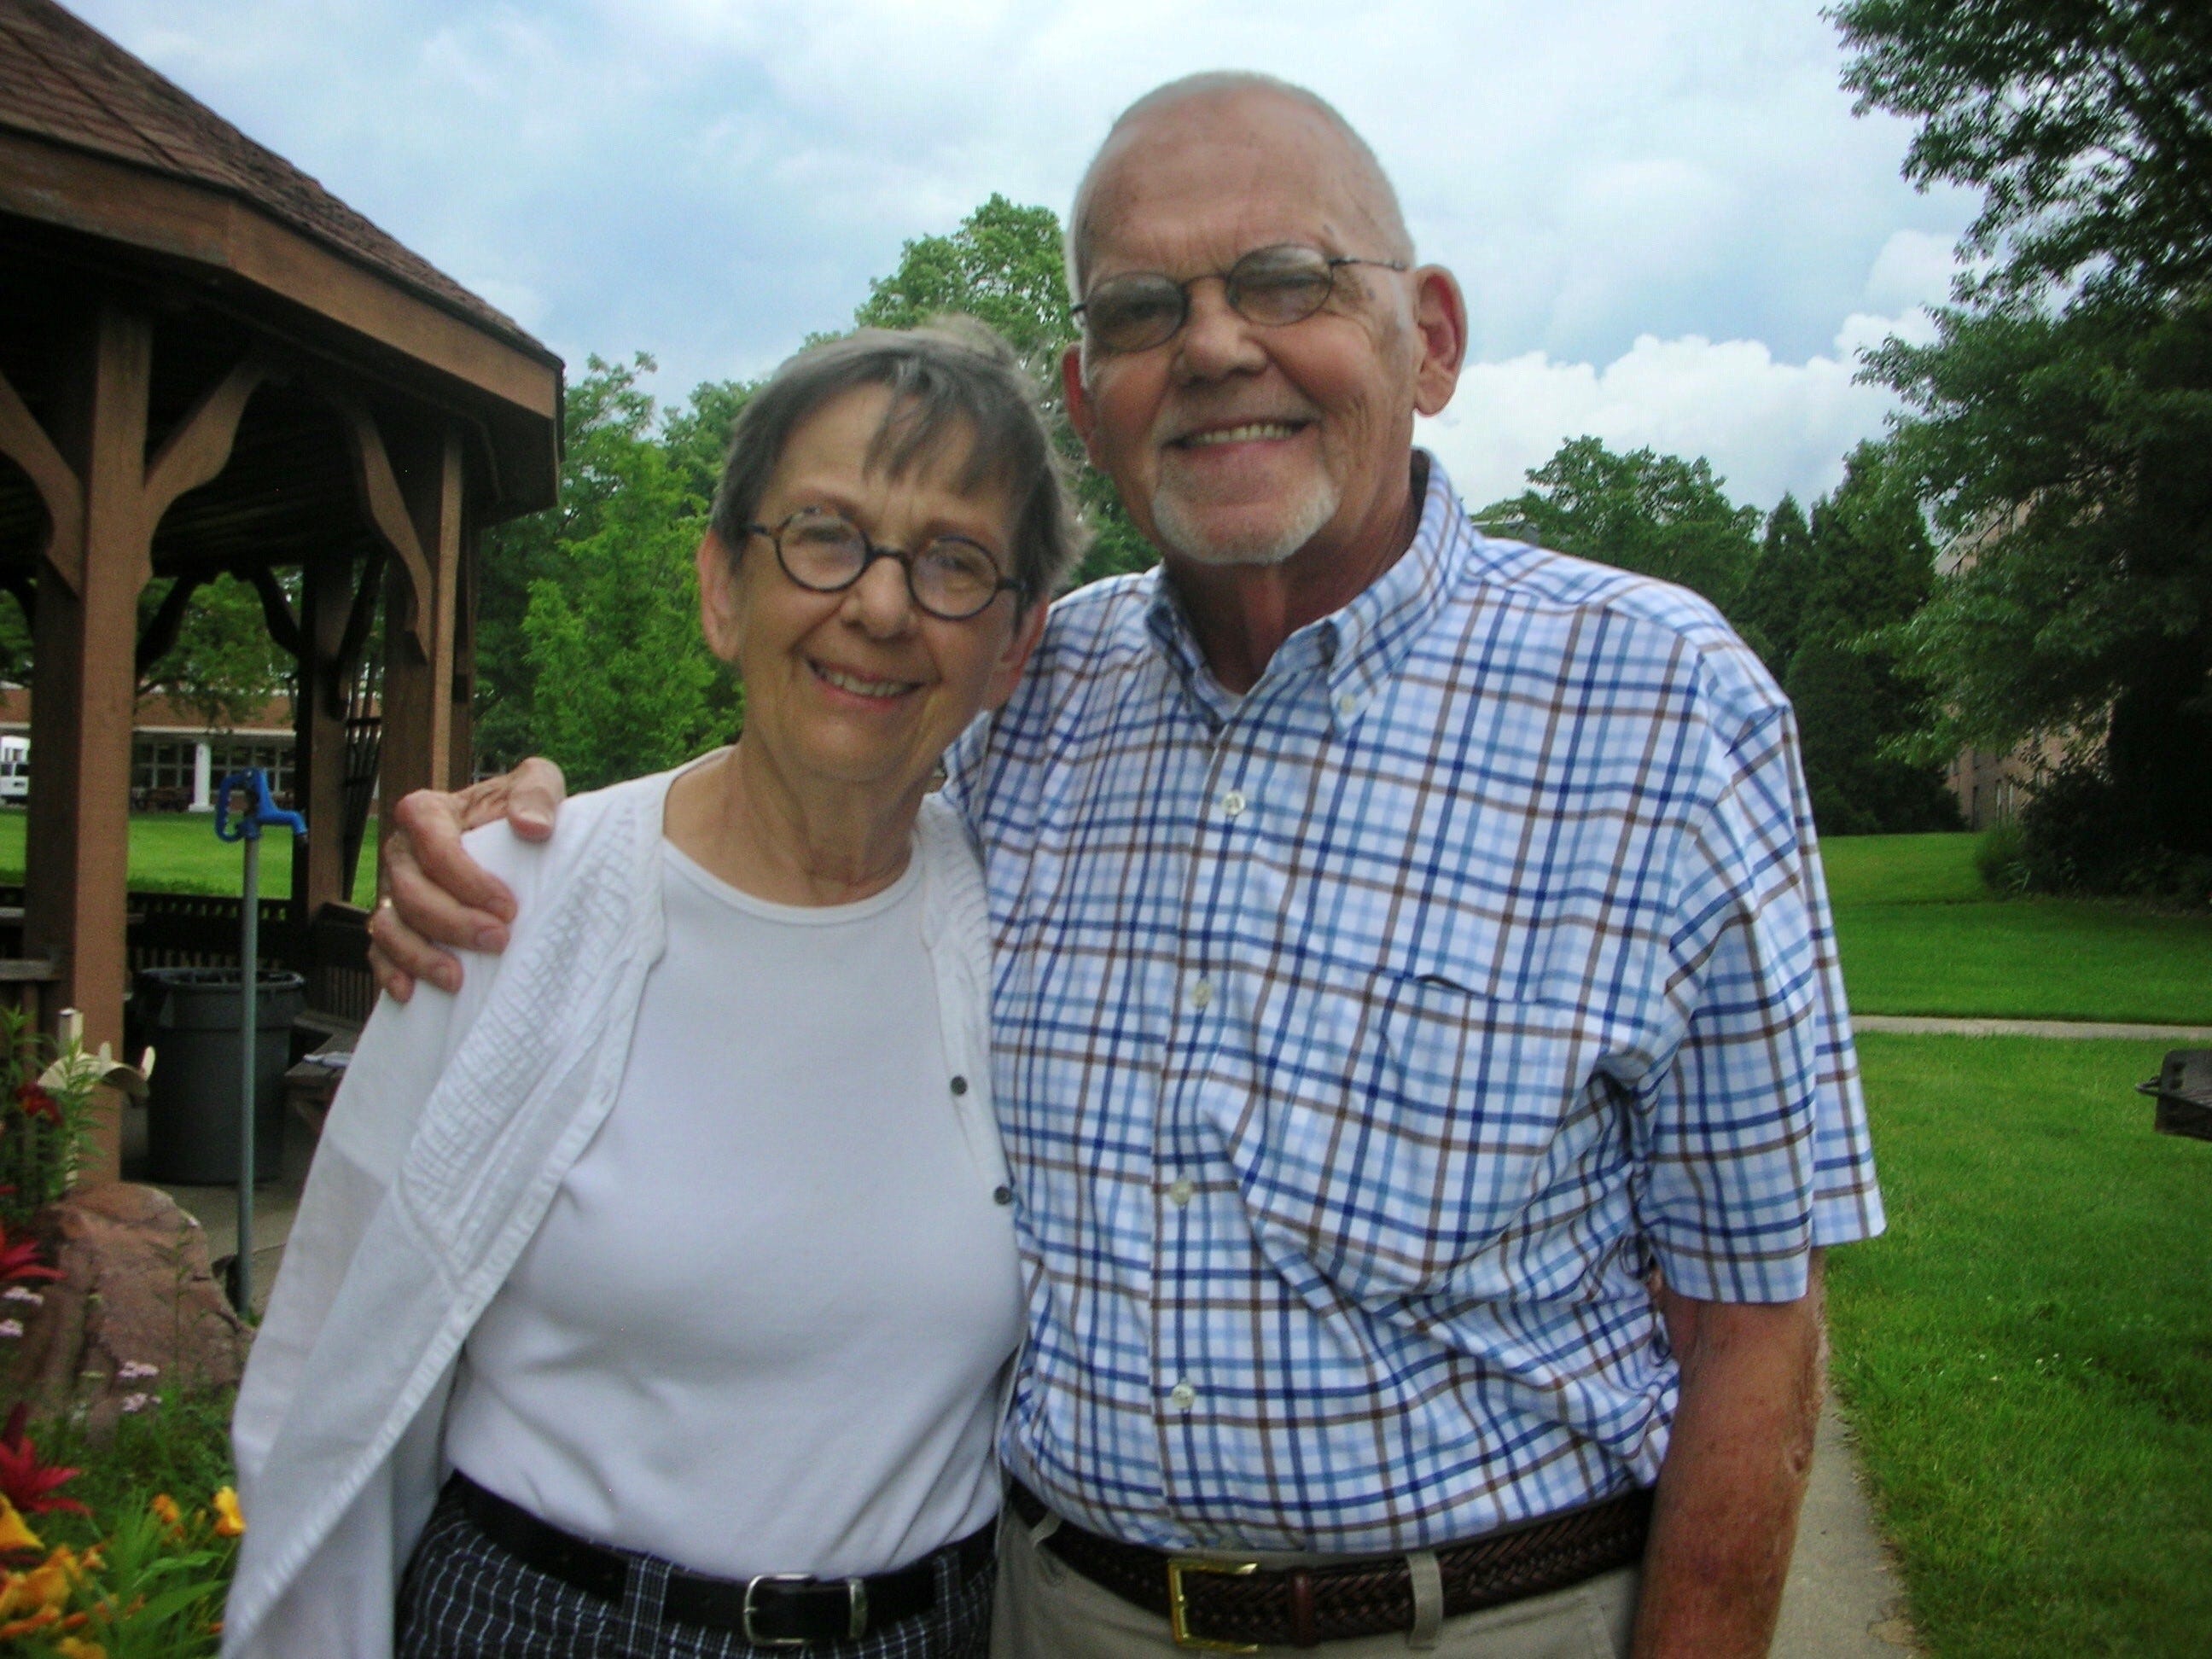 Larry and Sue Sonner met in 1957 at Central Methodist University and were married 61 years. They had three children, nine grandchildren and four great-grandchildren.